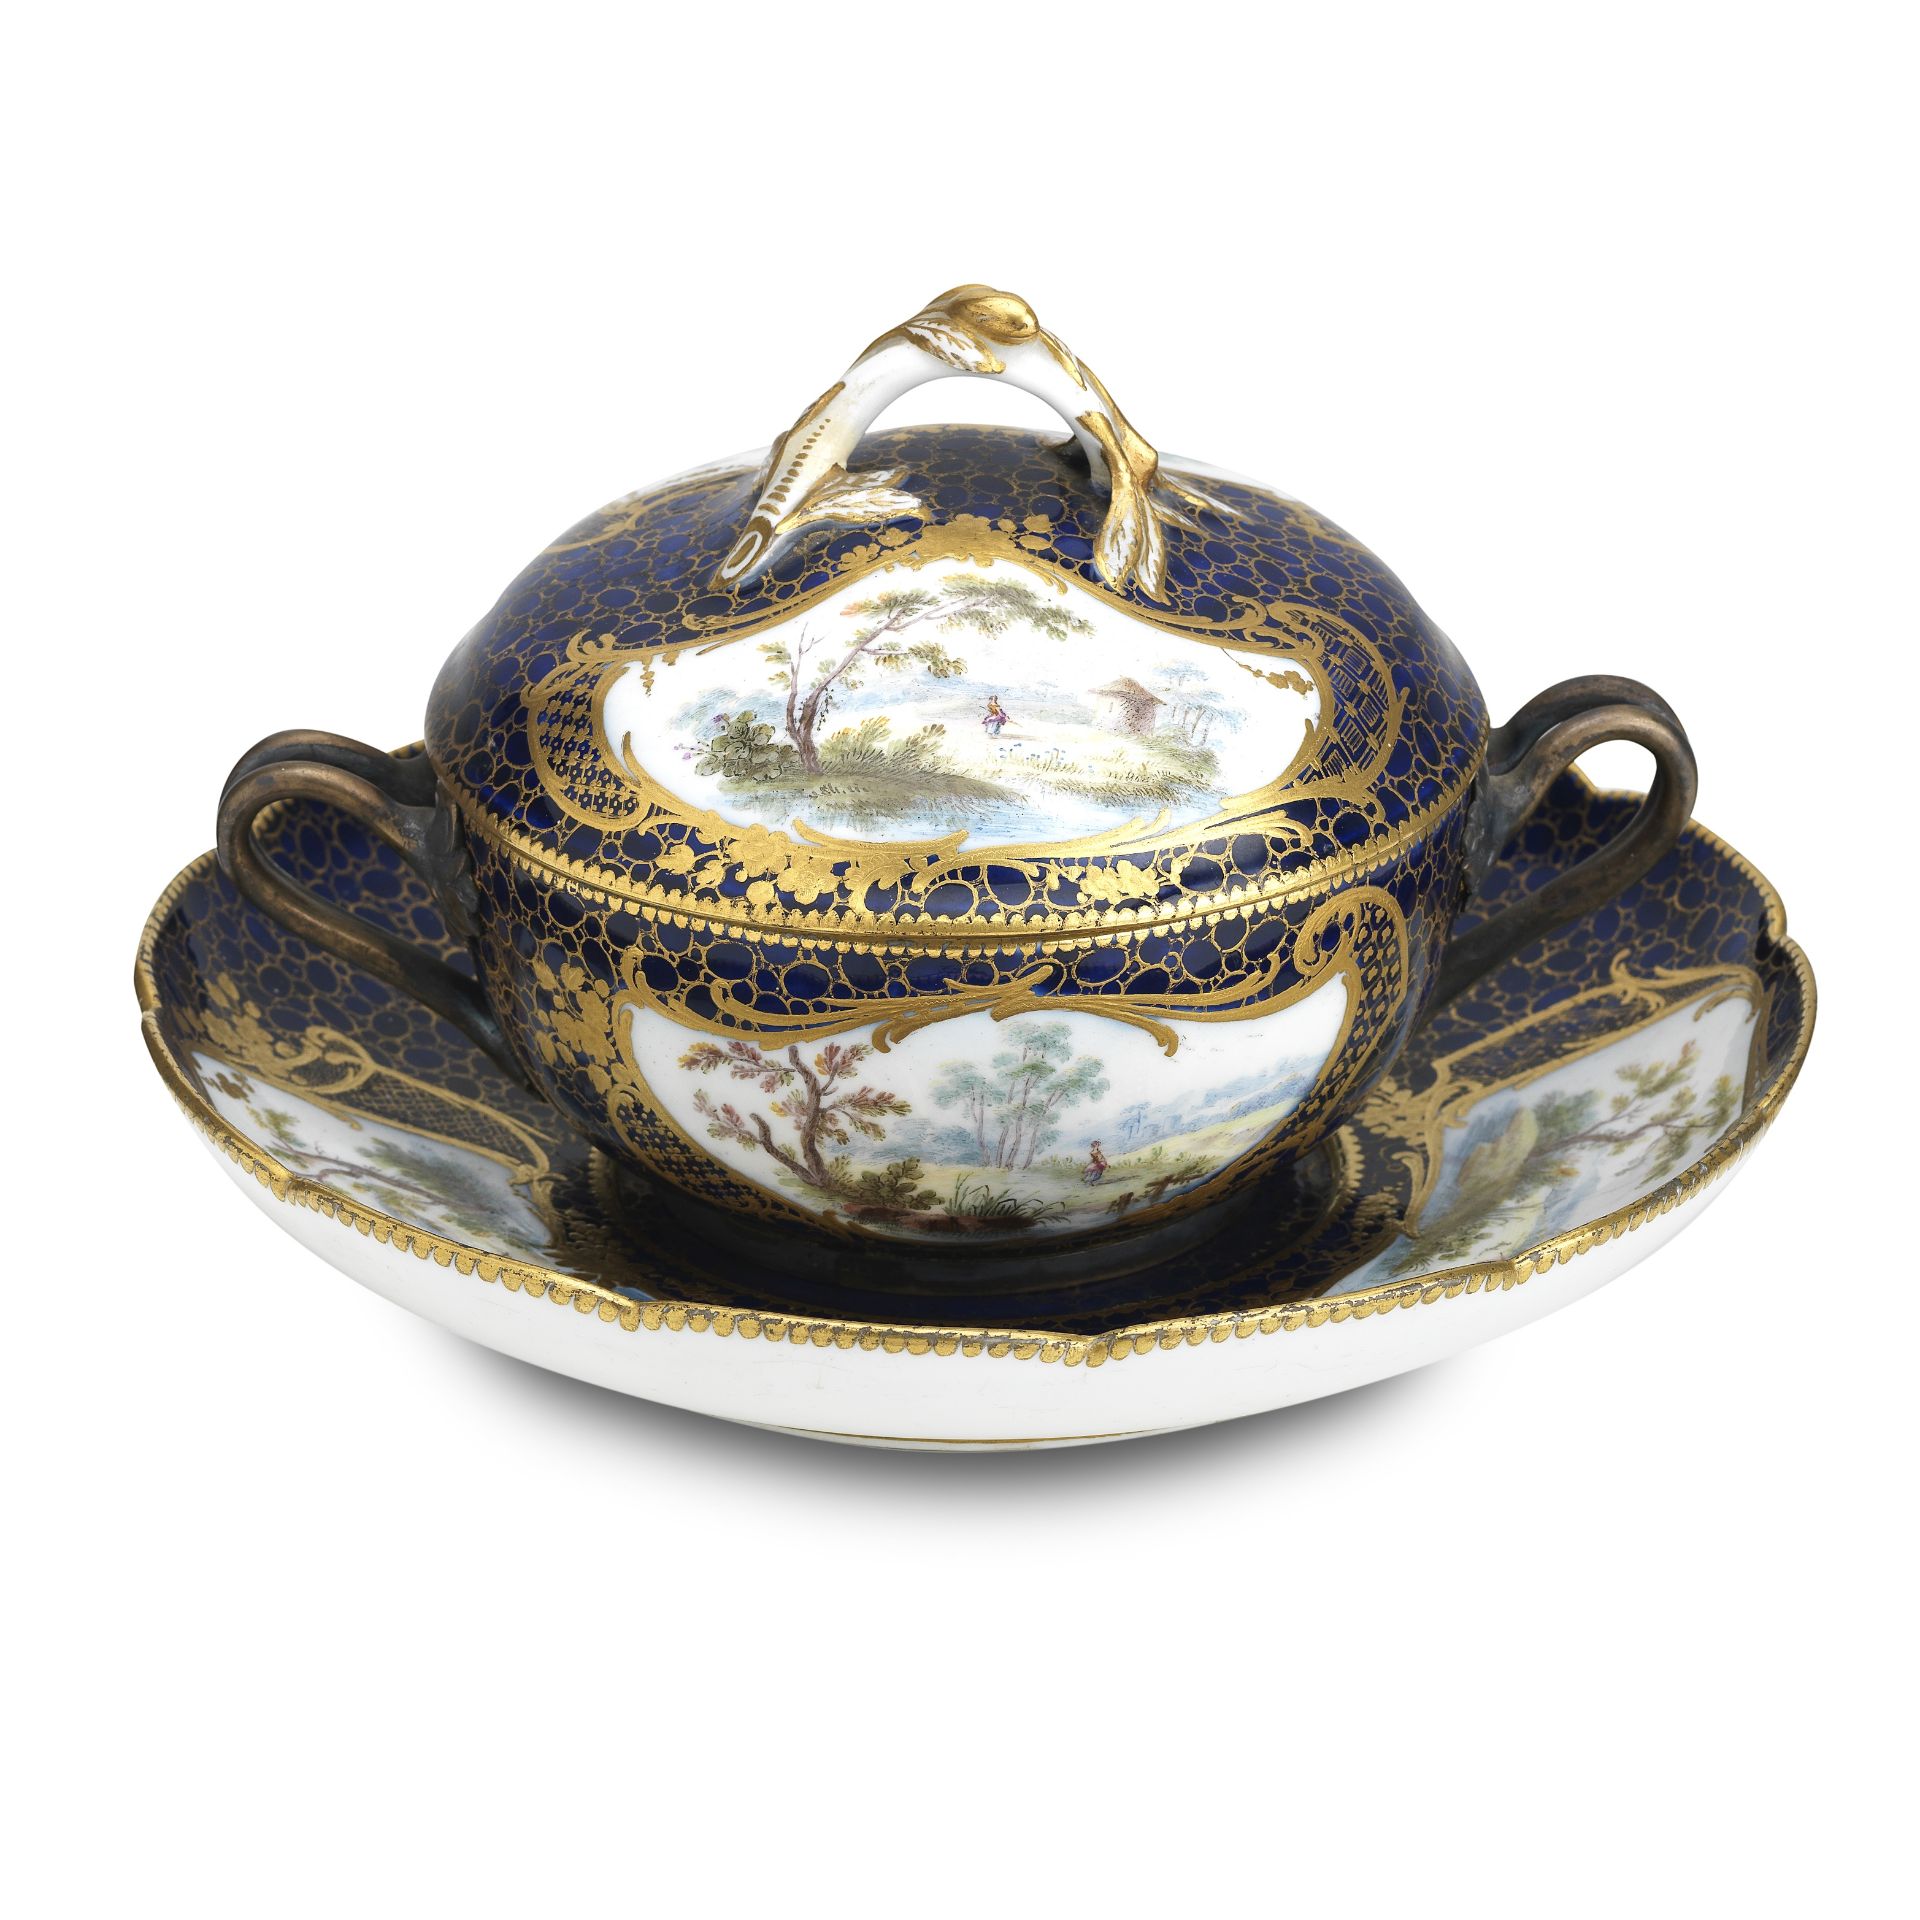 A Sevres-style blue ground ecuelle, cover and stand 19th century